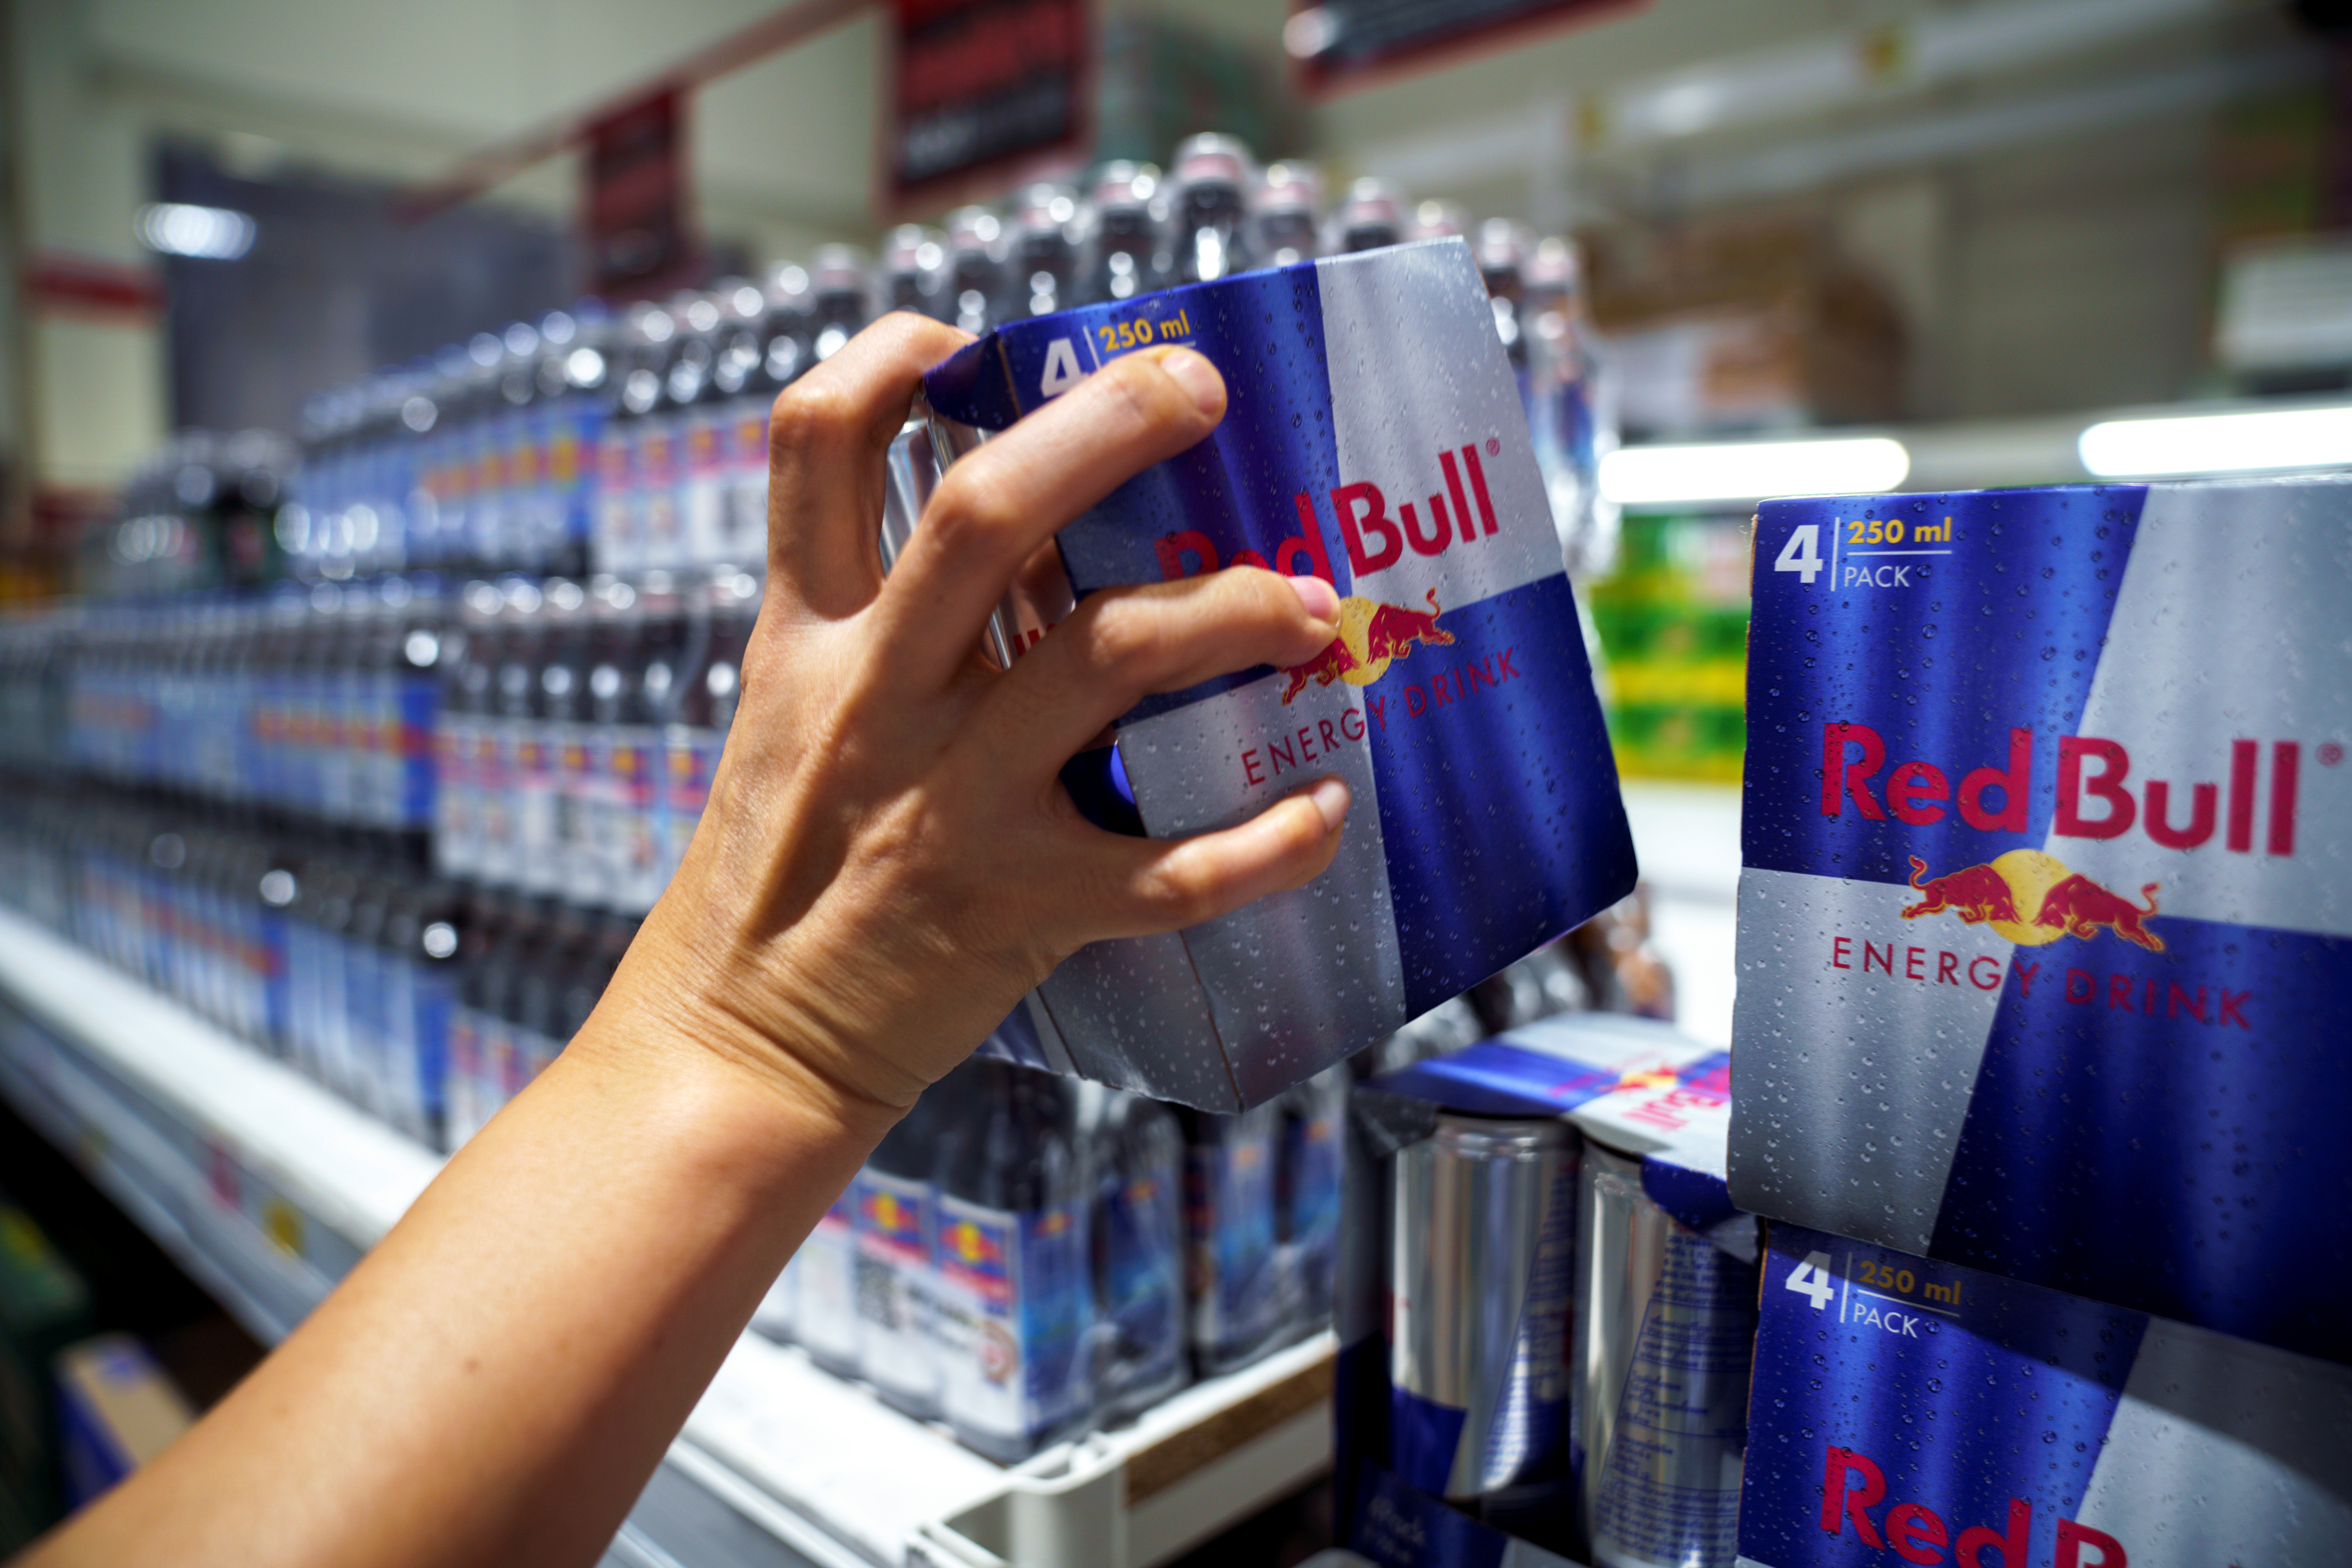 Woman buys Red Bull energy drink cans in a supermarket in Bangkok